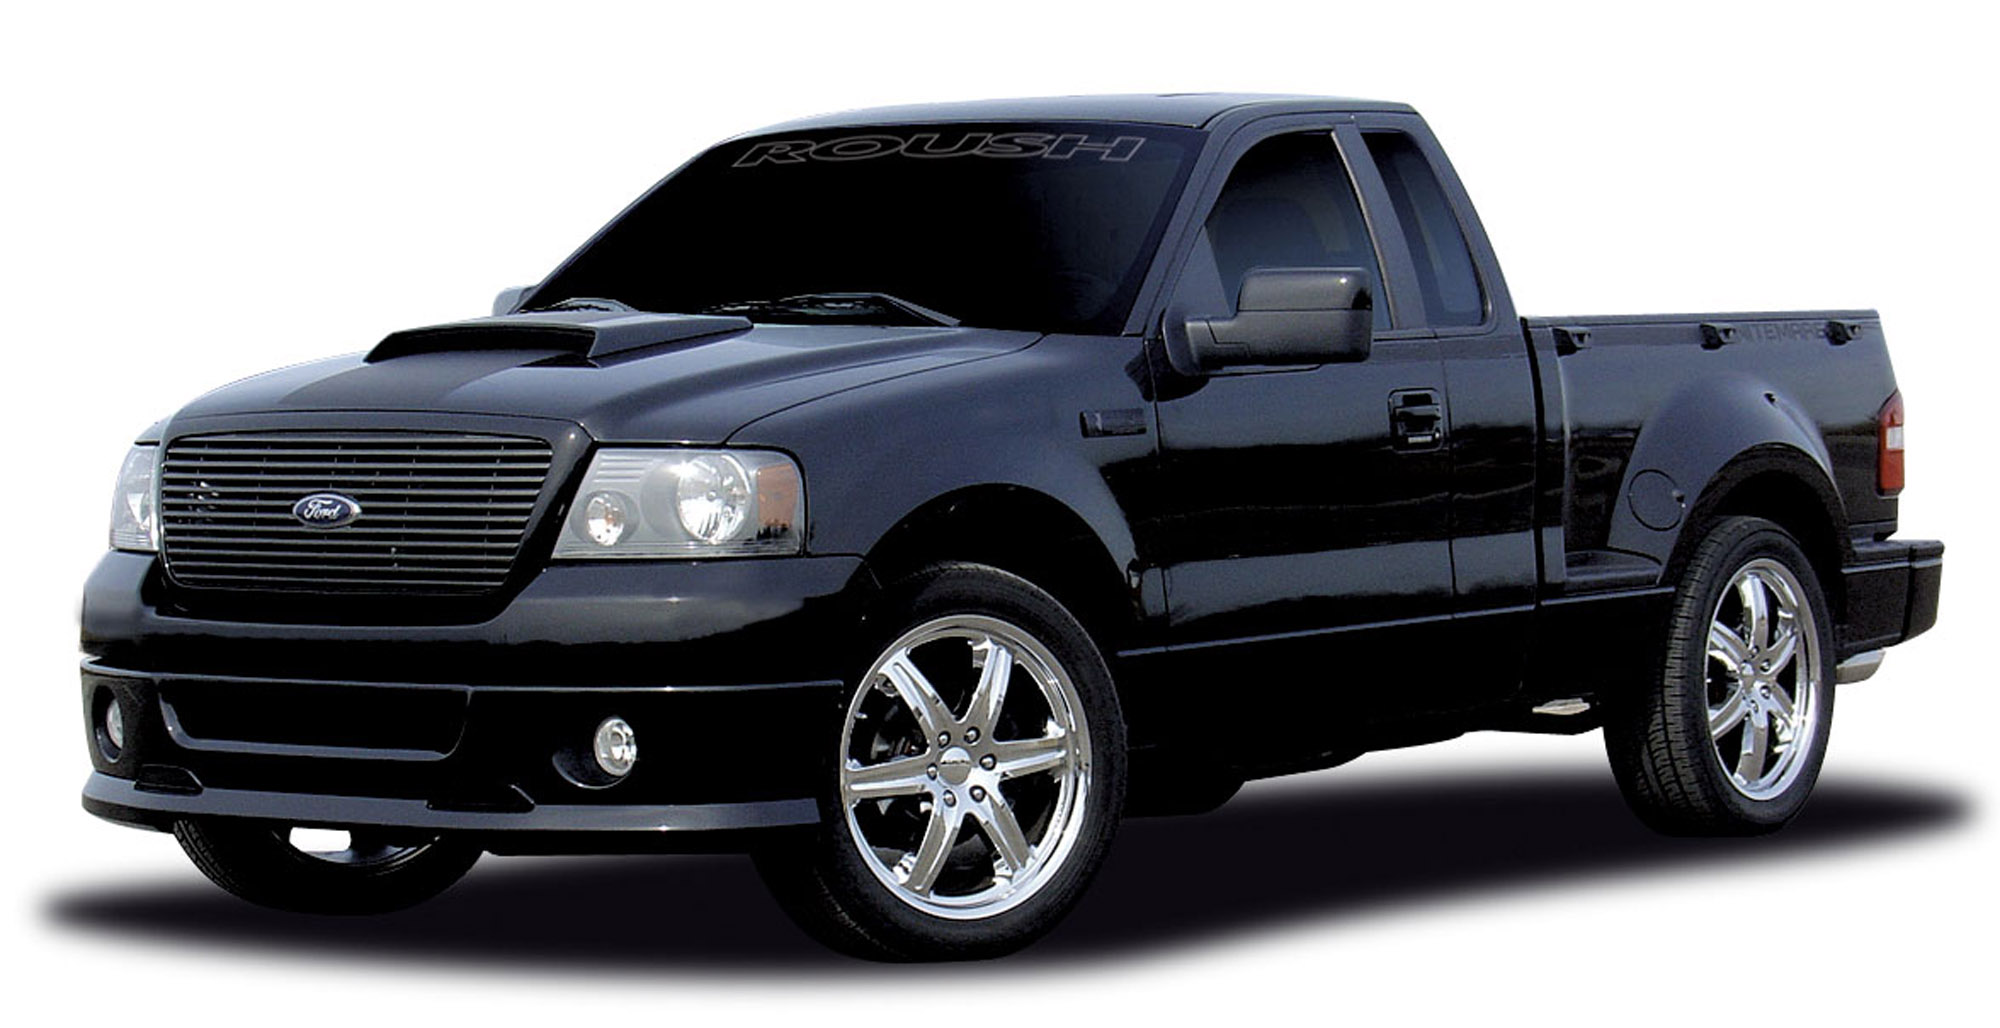 ROUSH Ford F-150 Nitemare